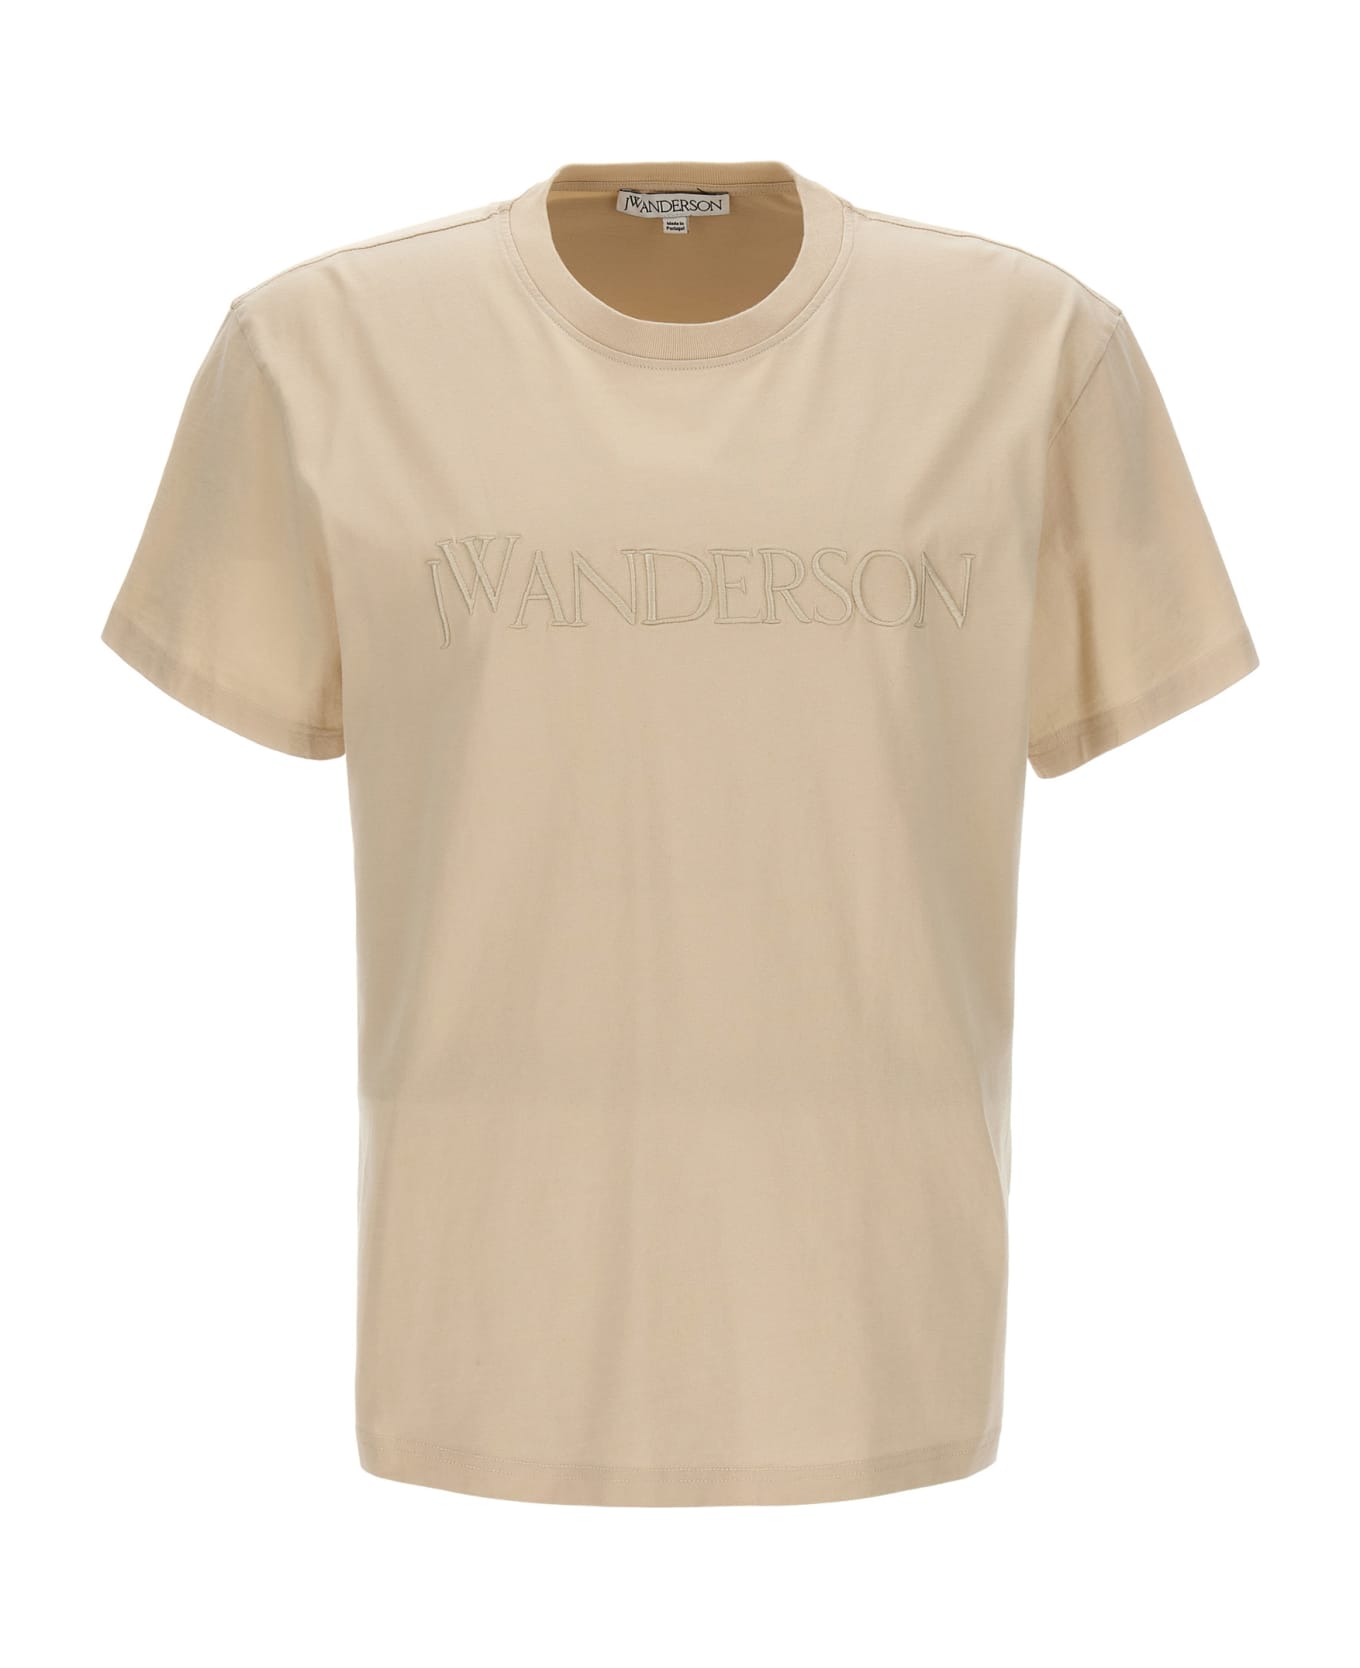 J.W. Anderson Logo Embroidery T-shirt - Beige